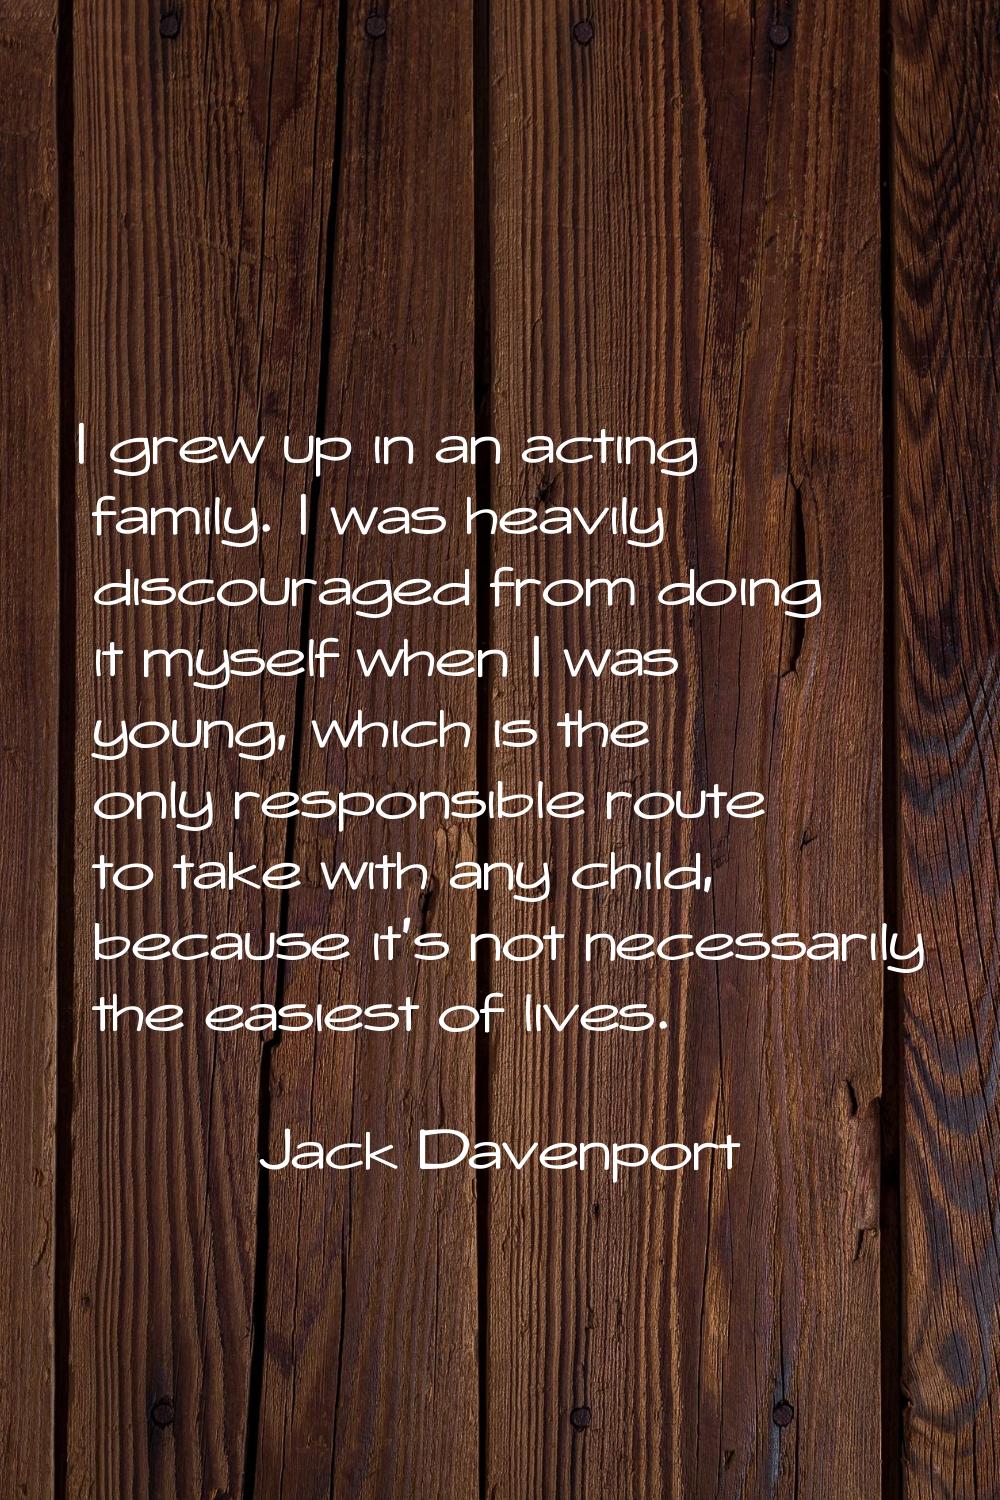 I grew up in an acting family. I was heavily discouraged from doing it myself when I was young, whi